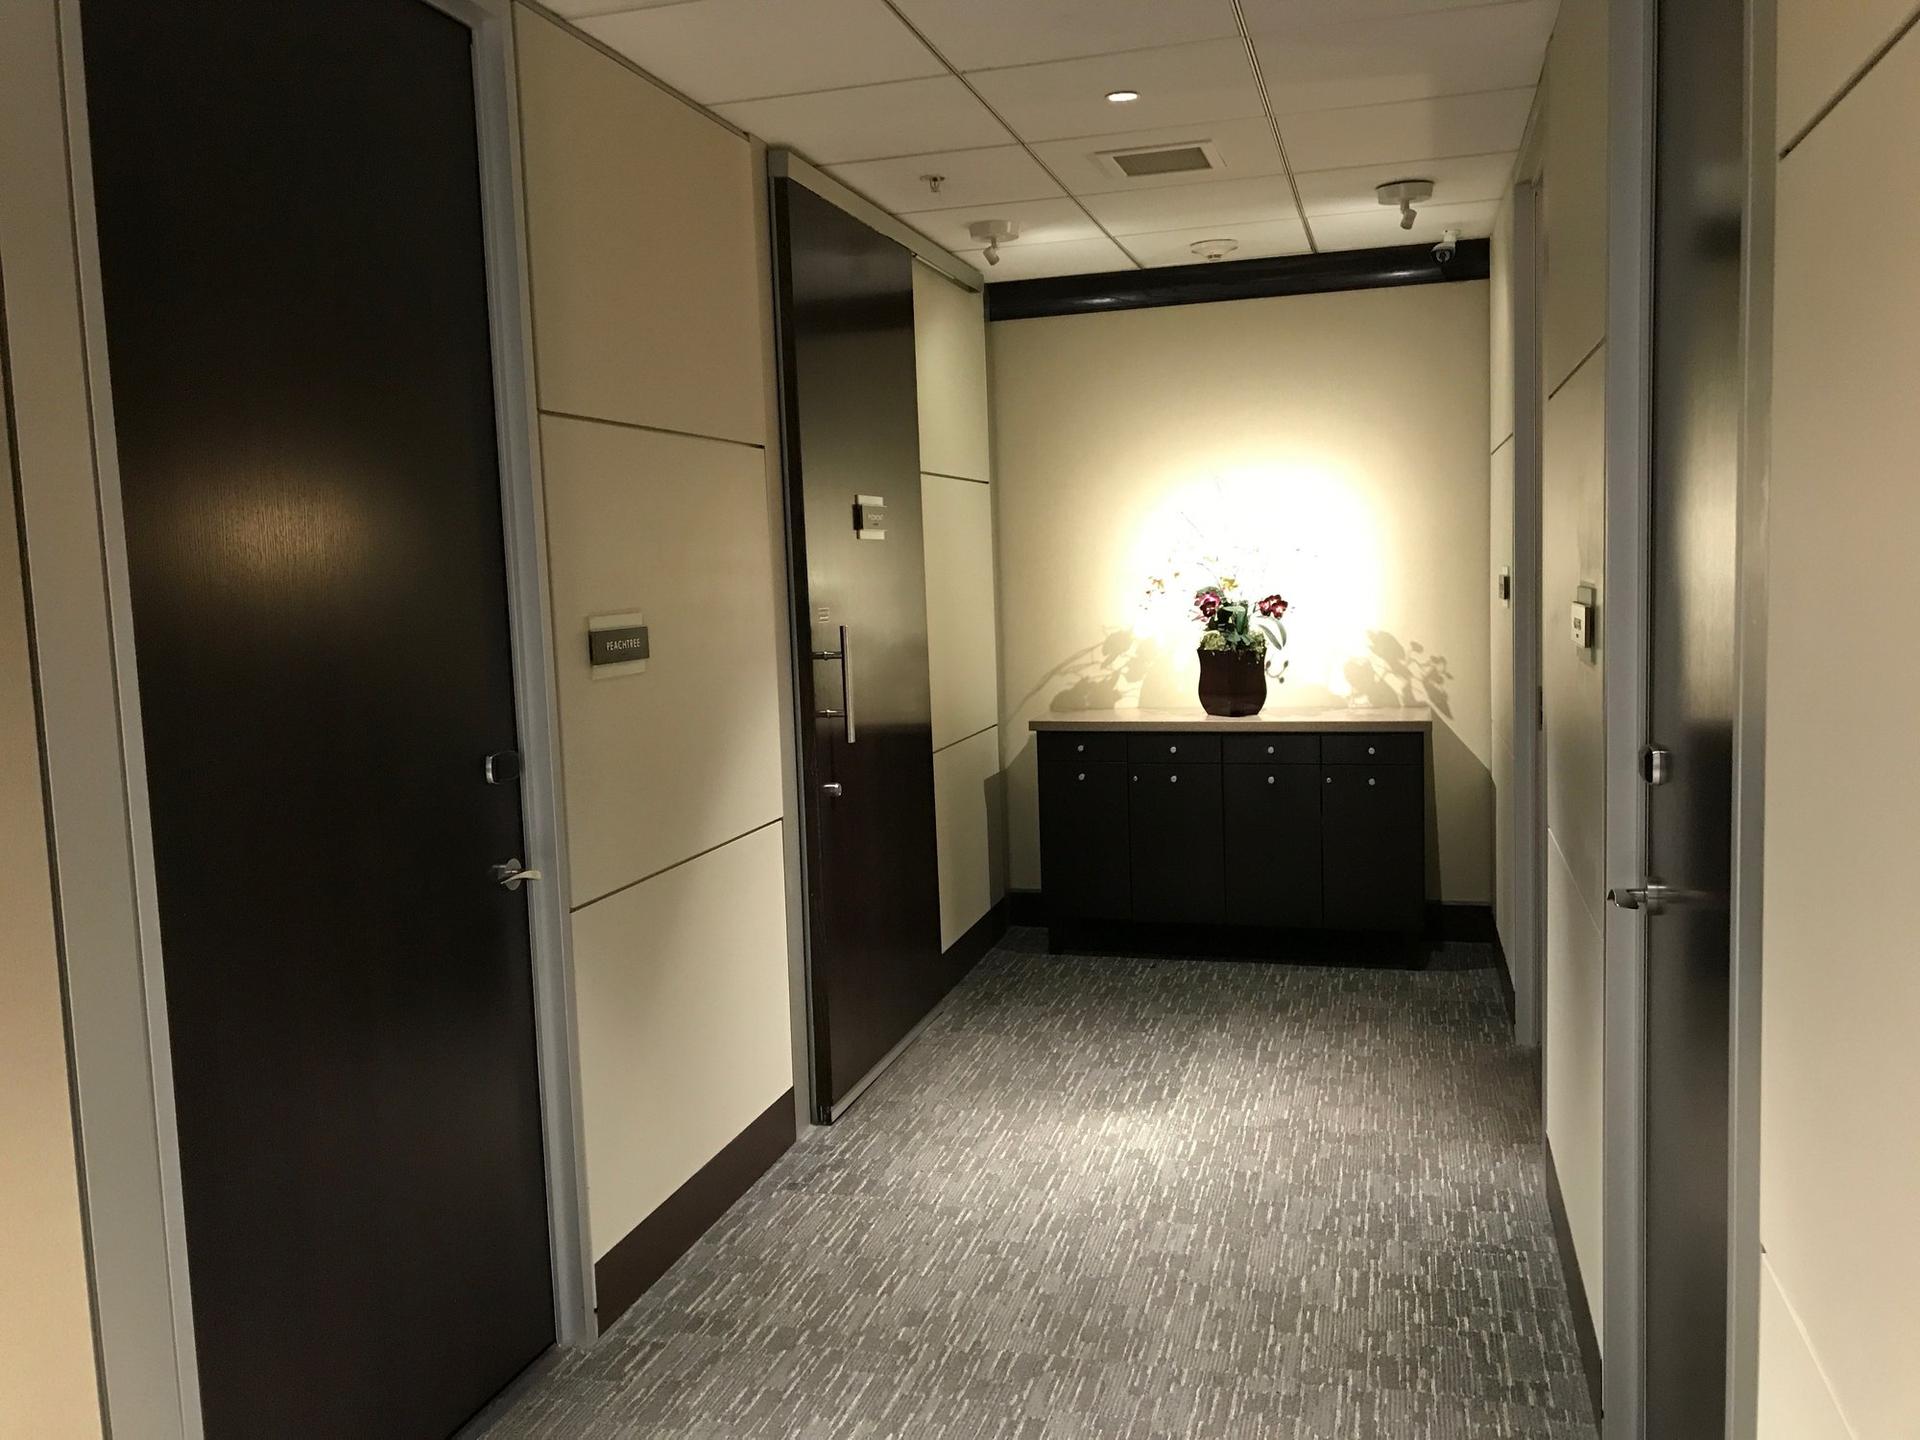 Minute Suites (Gate B15) image 3 of 19